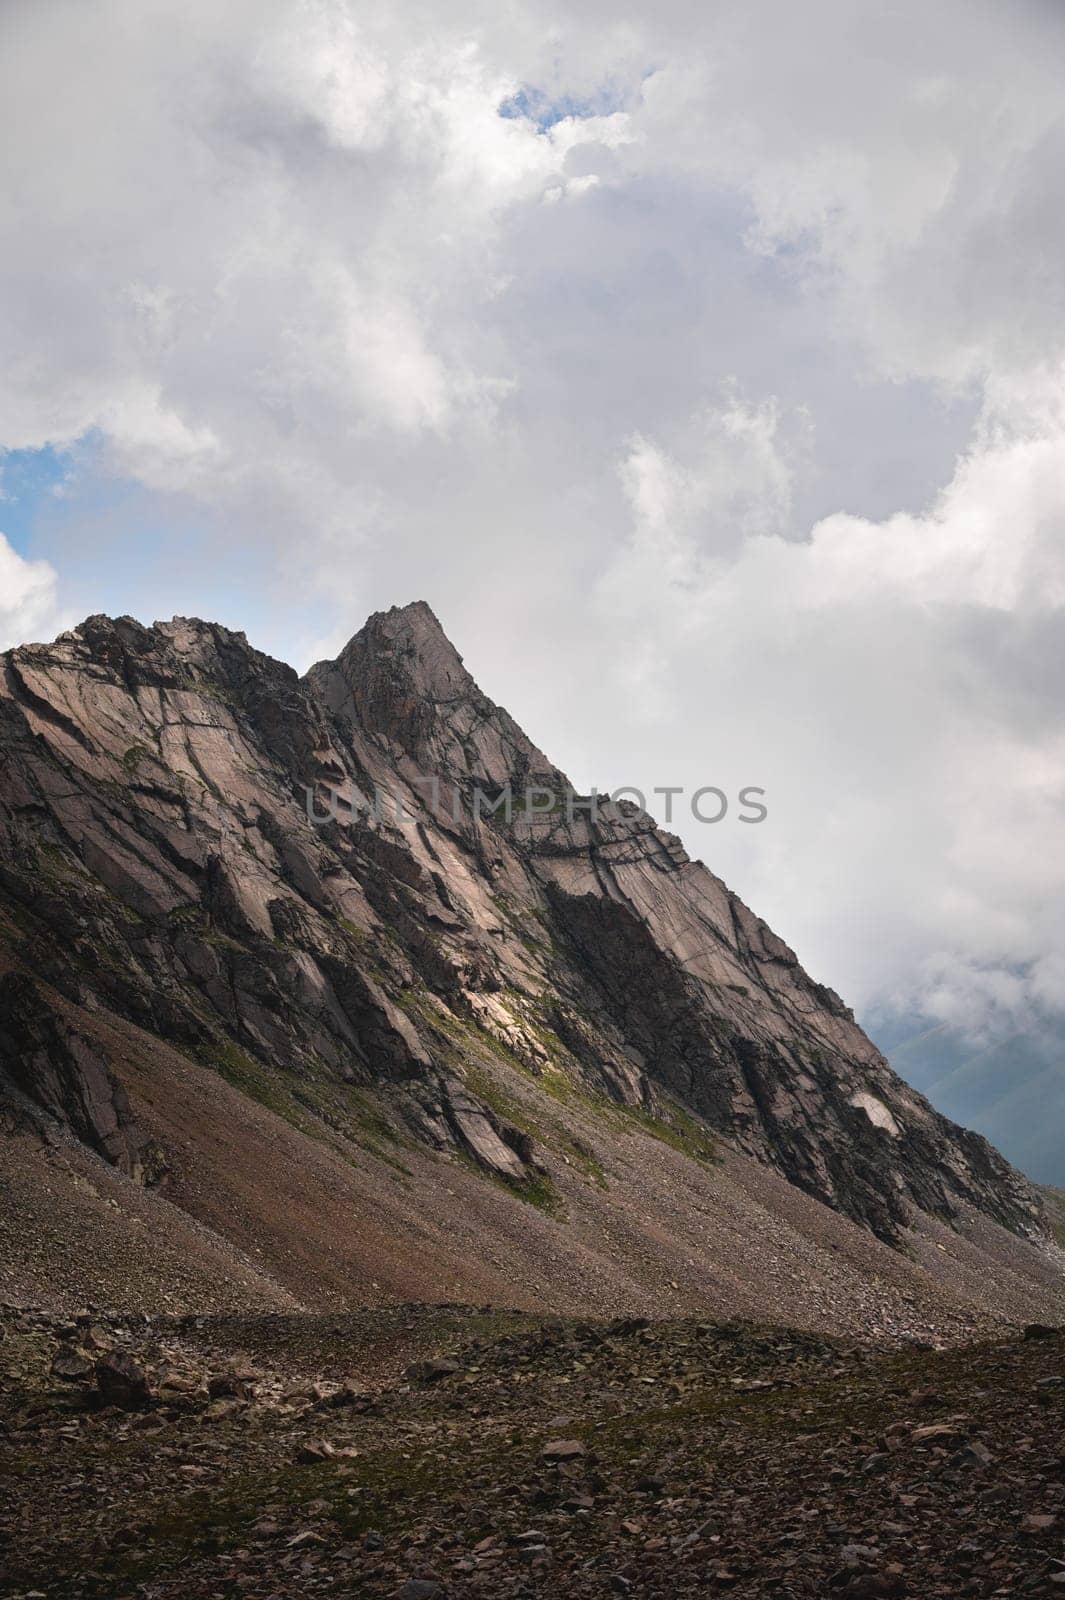 Close-up of a mountain wall at daytime against the backdrop of cumulus clouds by yanik88